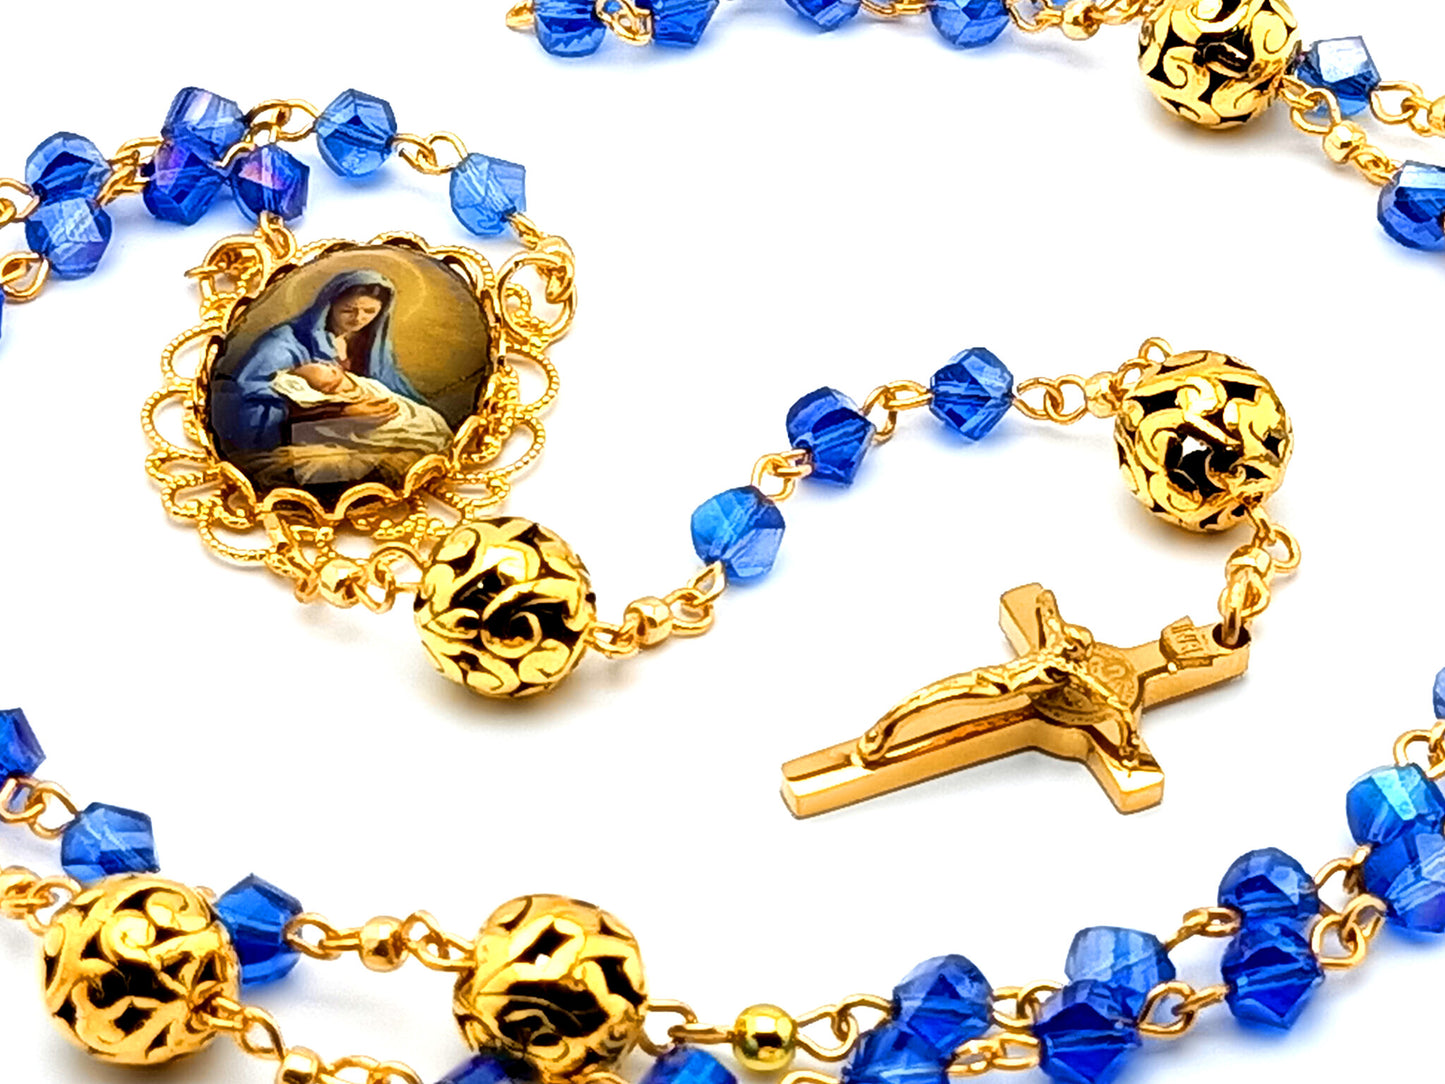 The Nativity of Baby Jesus unique rosary beads with blue glass and gold beads and gold plated stainless steel Saint Benedict crucifix.